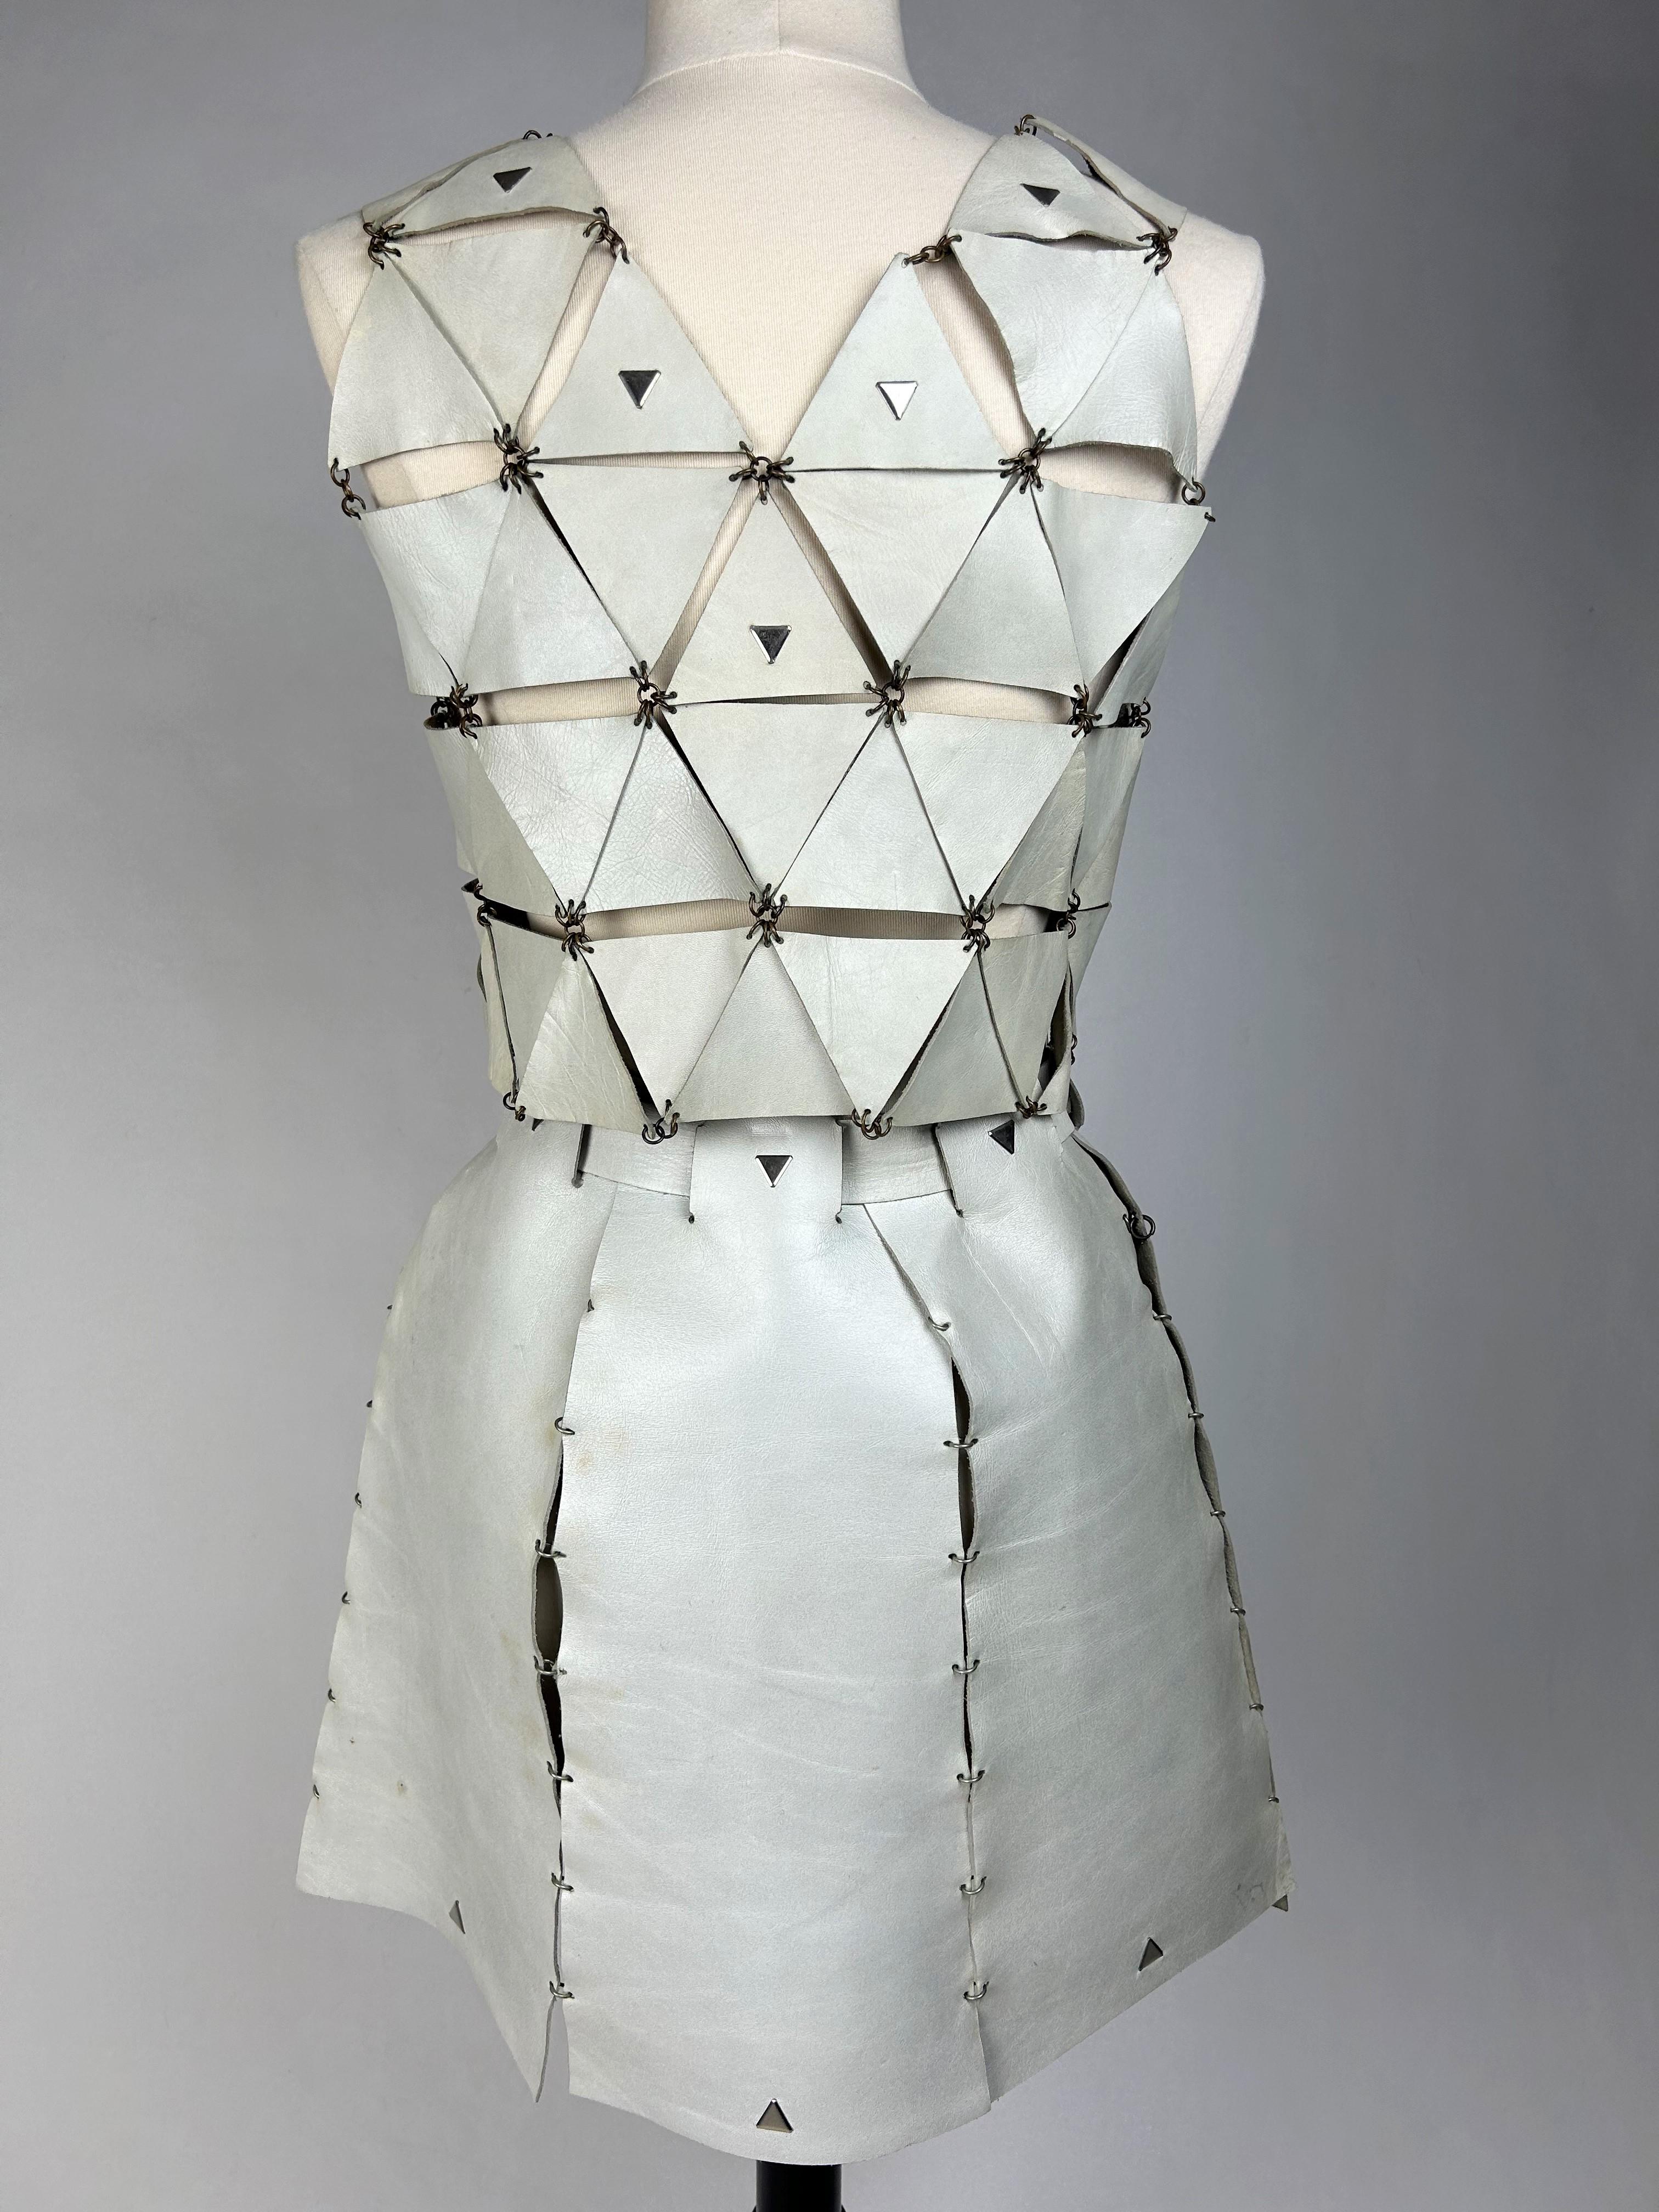 A Couture Leather skirt and top set by Paco Rabanne - Paris 1967 For Sale 4